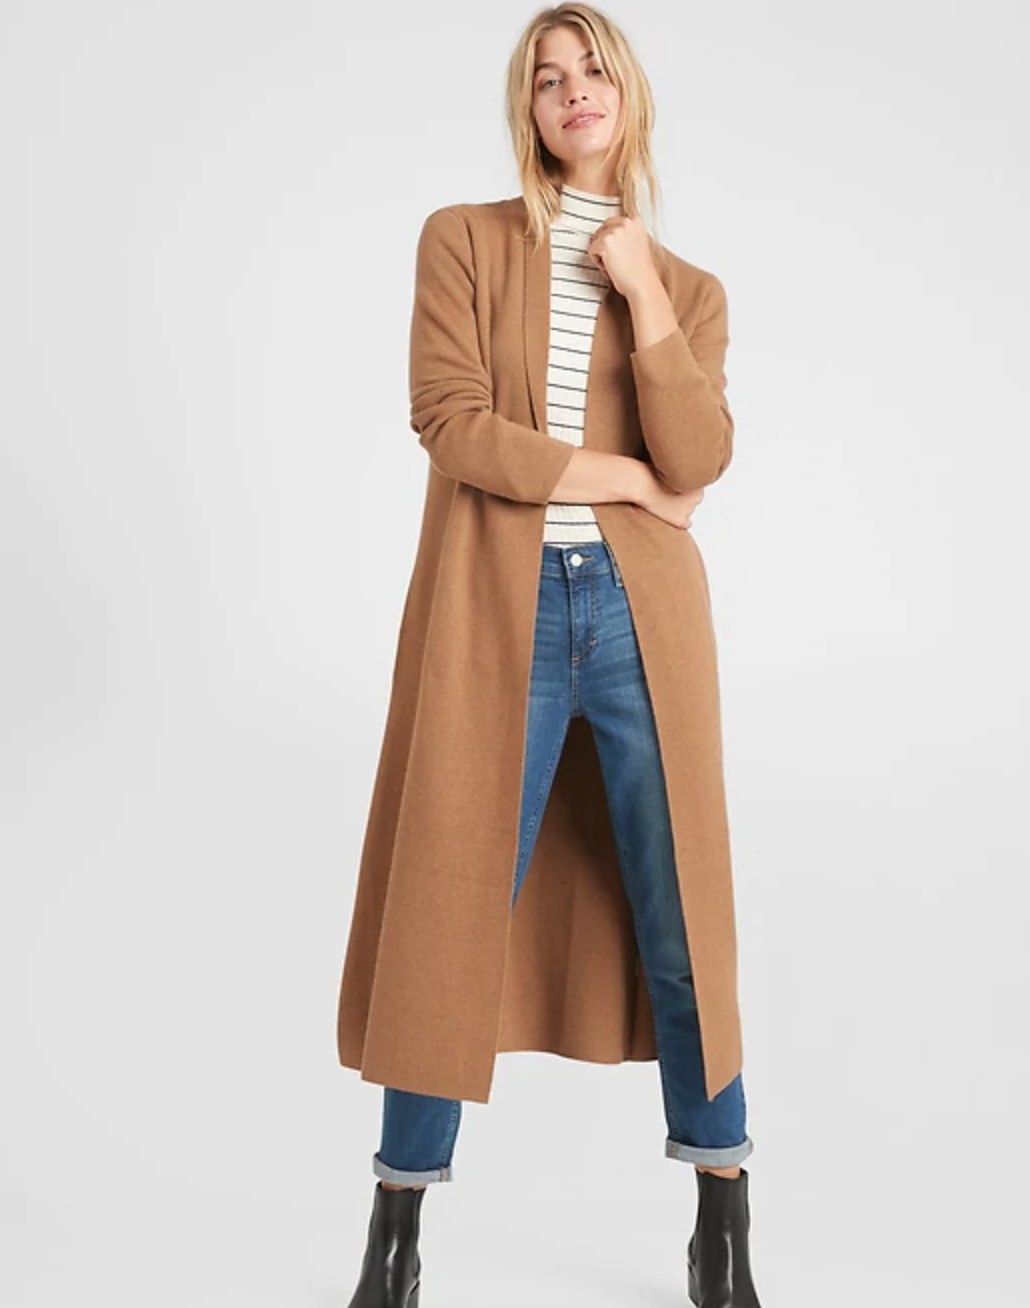 The structured sweater coat in camel